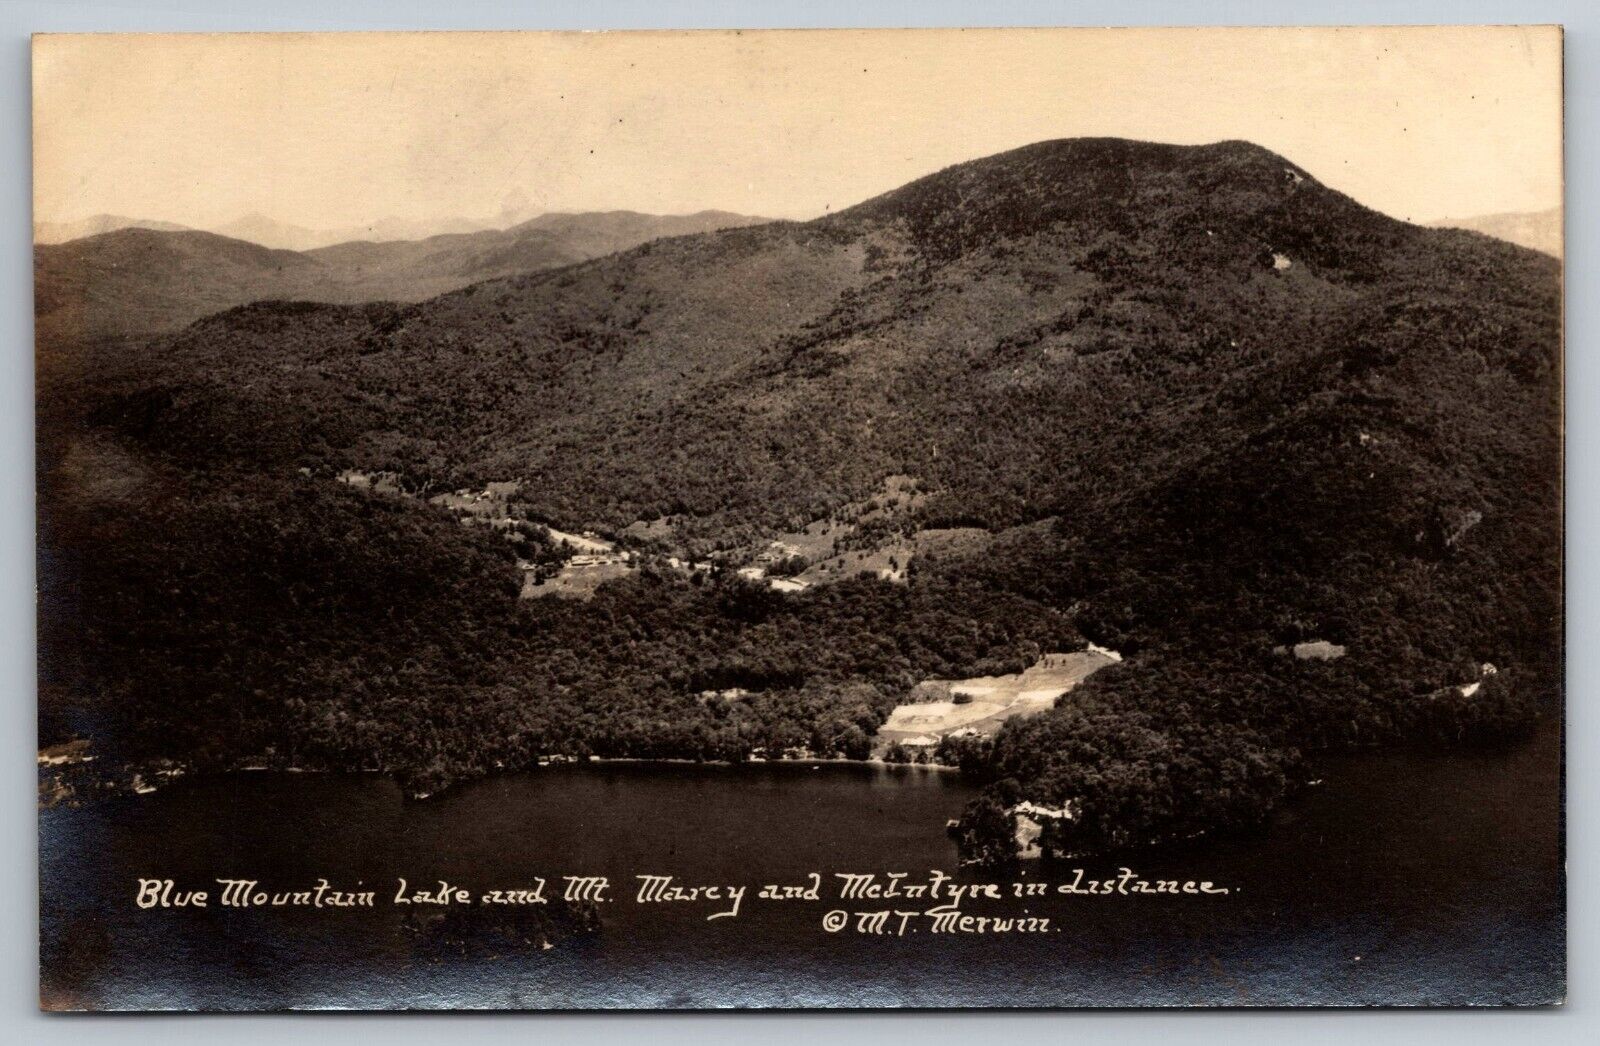 Blue Mountain Lake and Mt. Mary & McIntyre. New York Real Photo Postcard RPPC